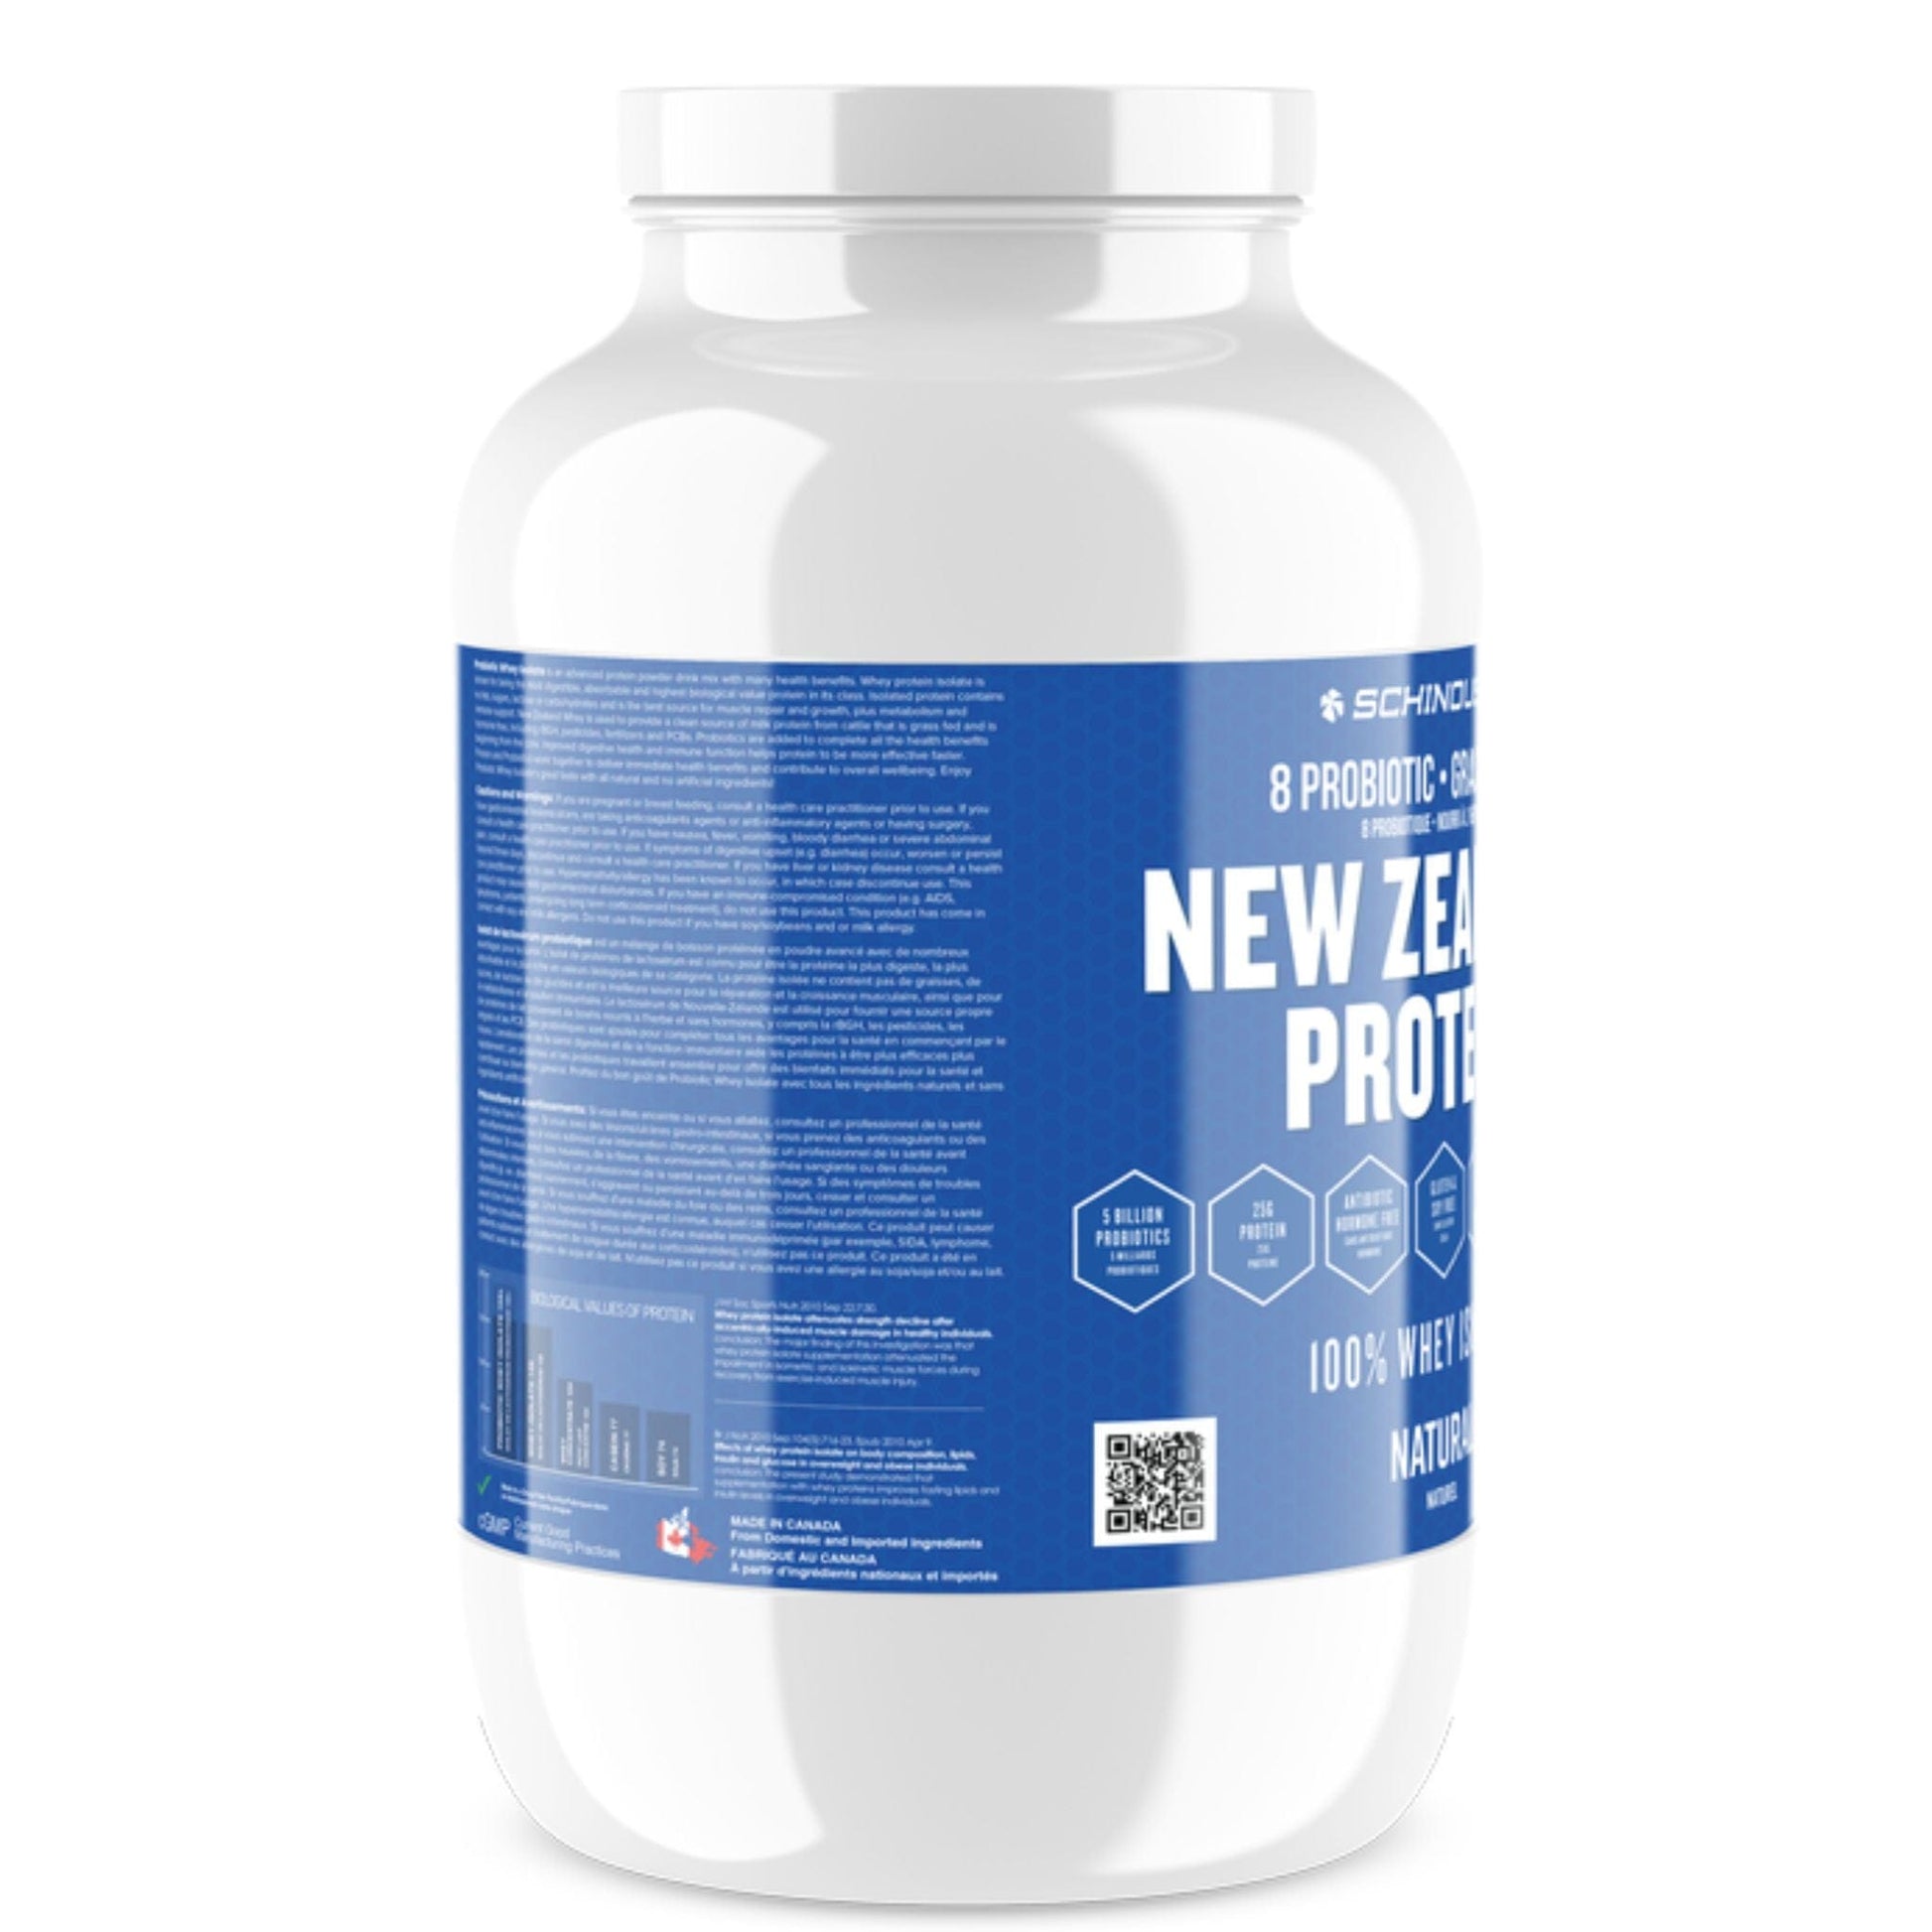 Natural | Schinoussa New Zealand Protein 8 Probiotic 100% Whey Isolate // Natural flavour